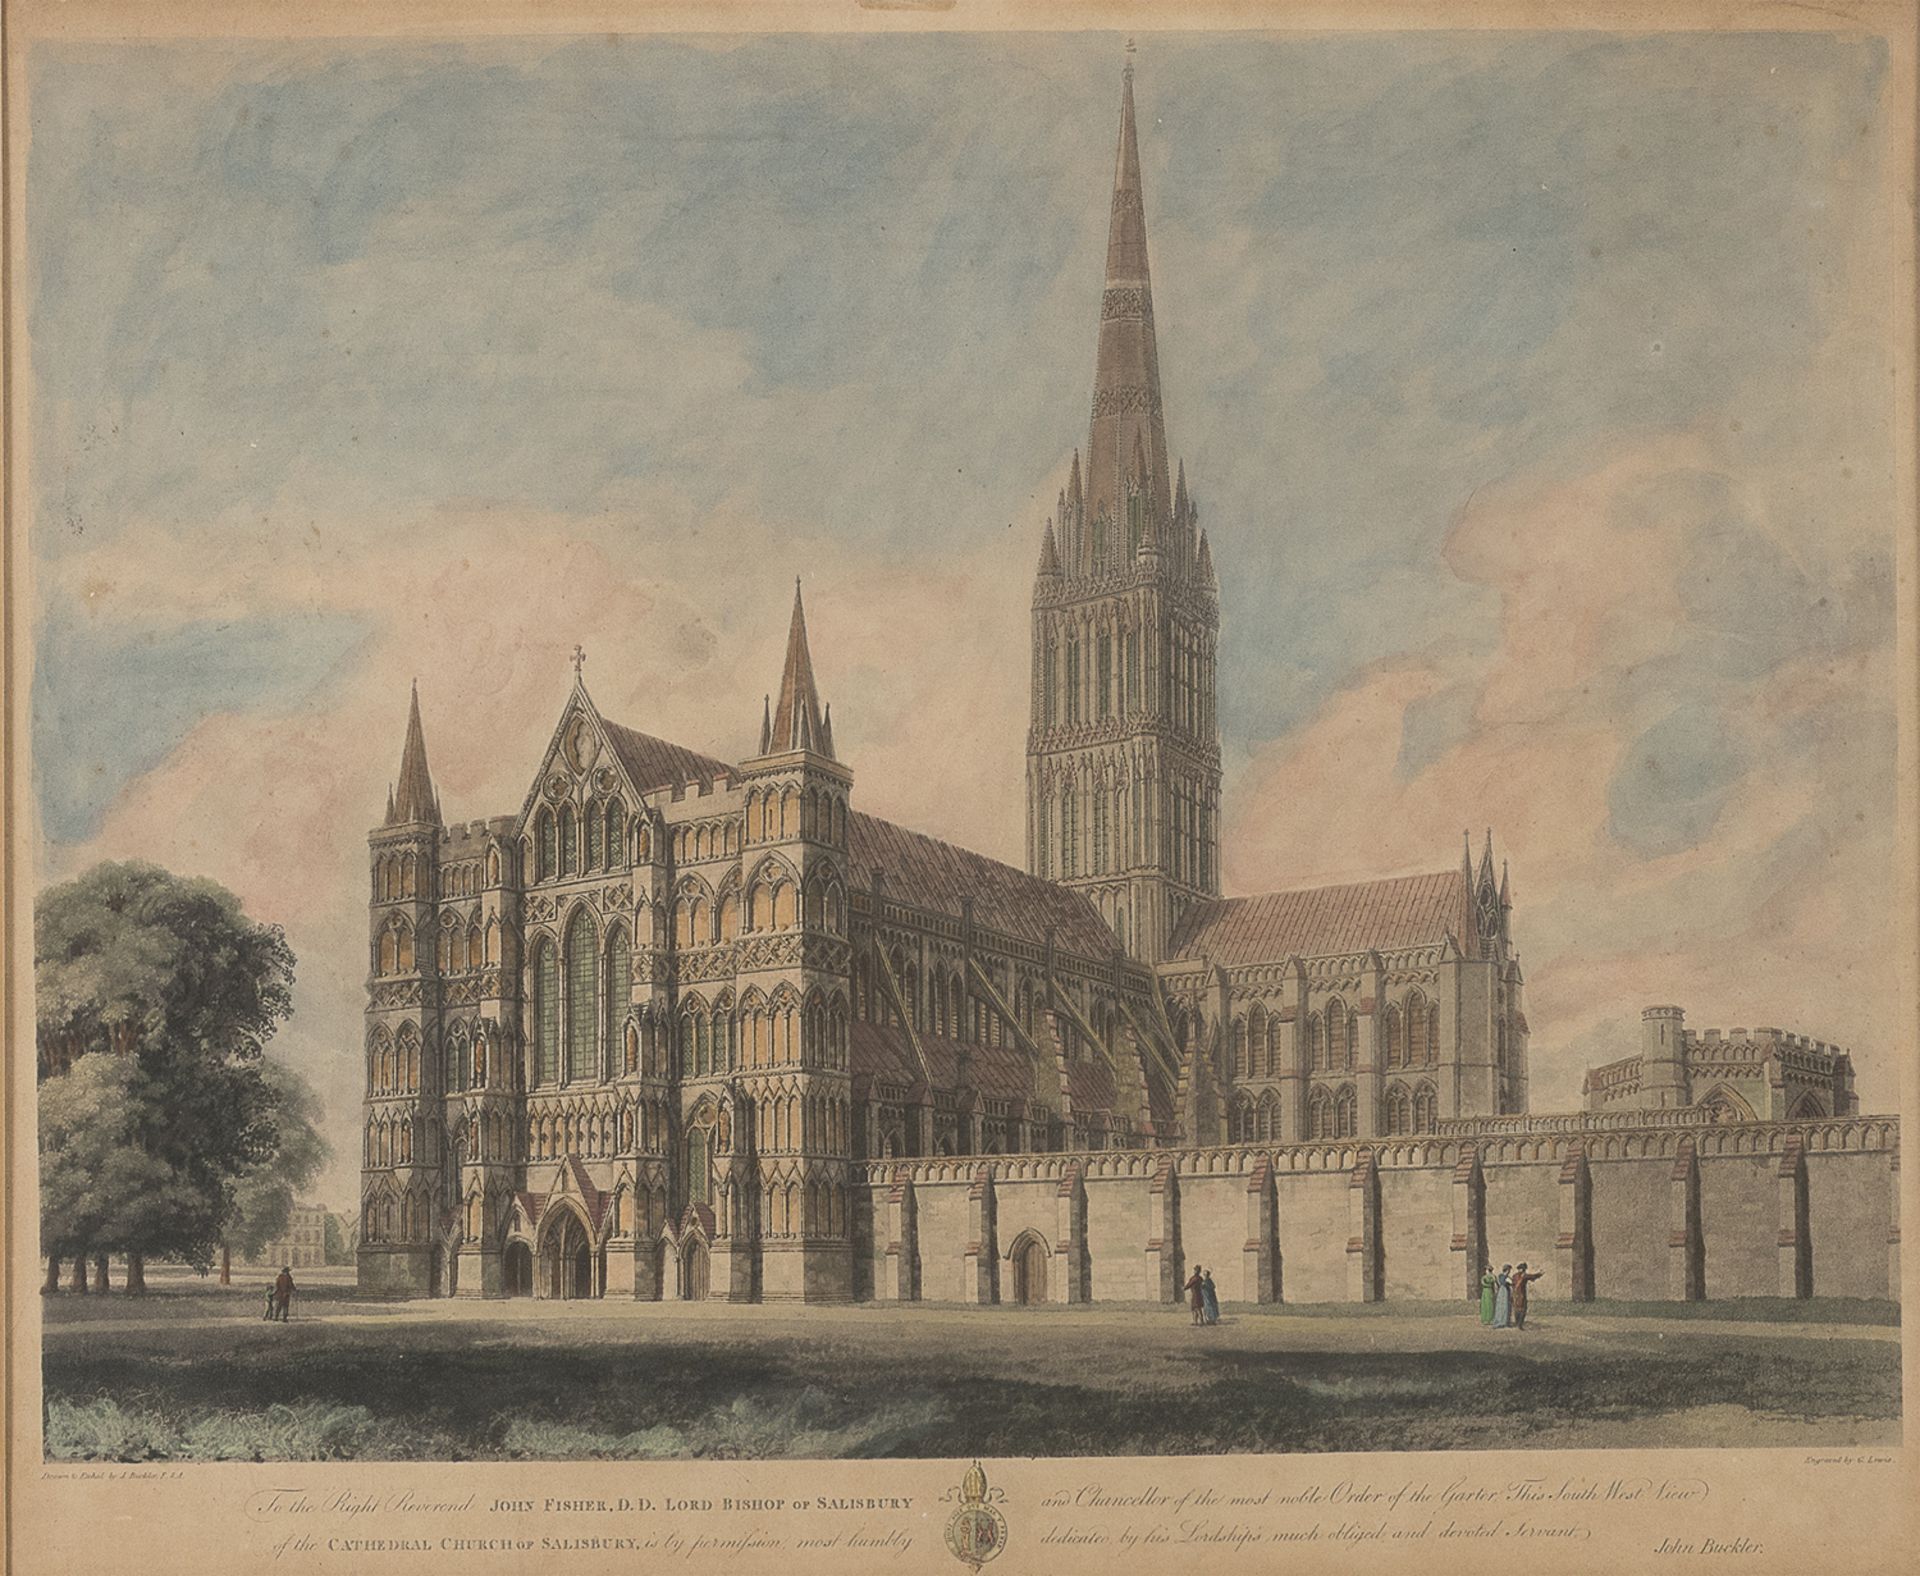 ENGRAVING OF THE SALISBURY CATHEDRAL 19TH CENTURY